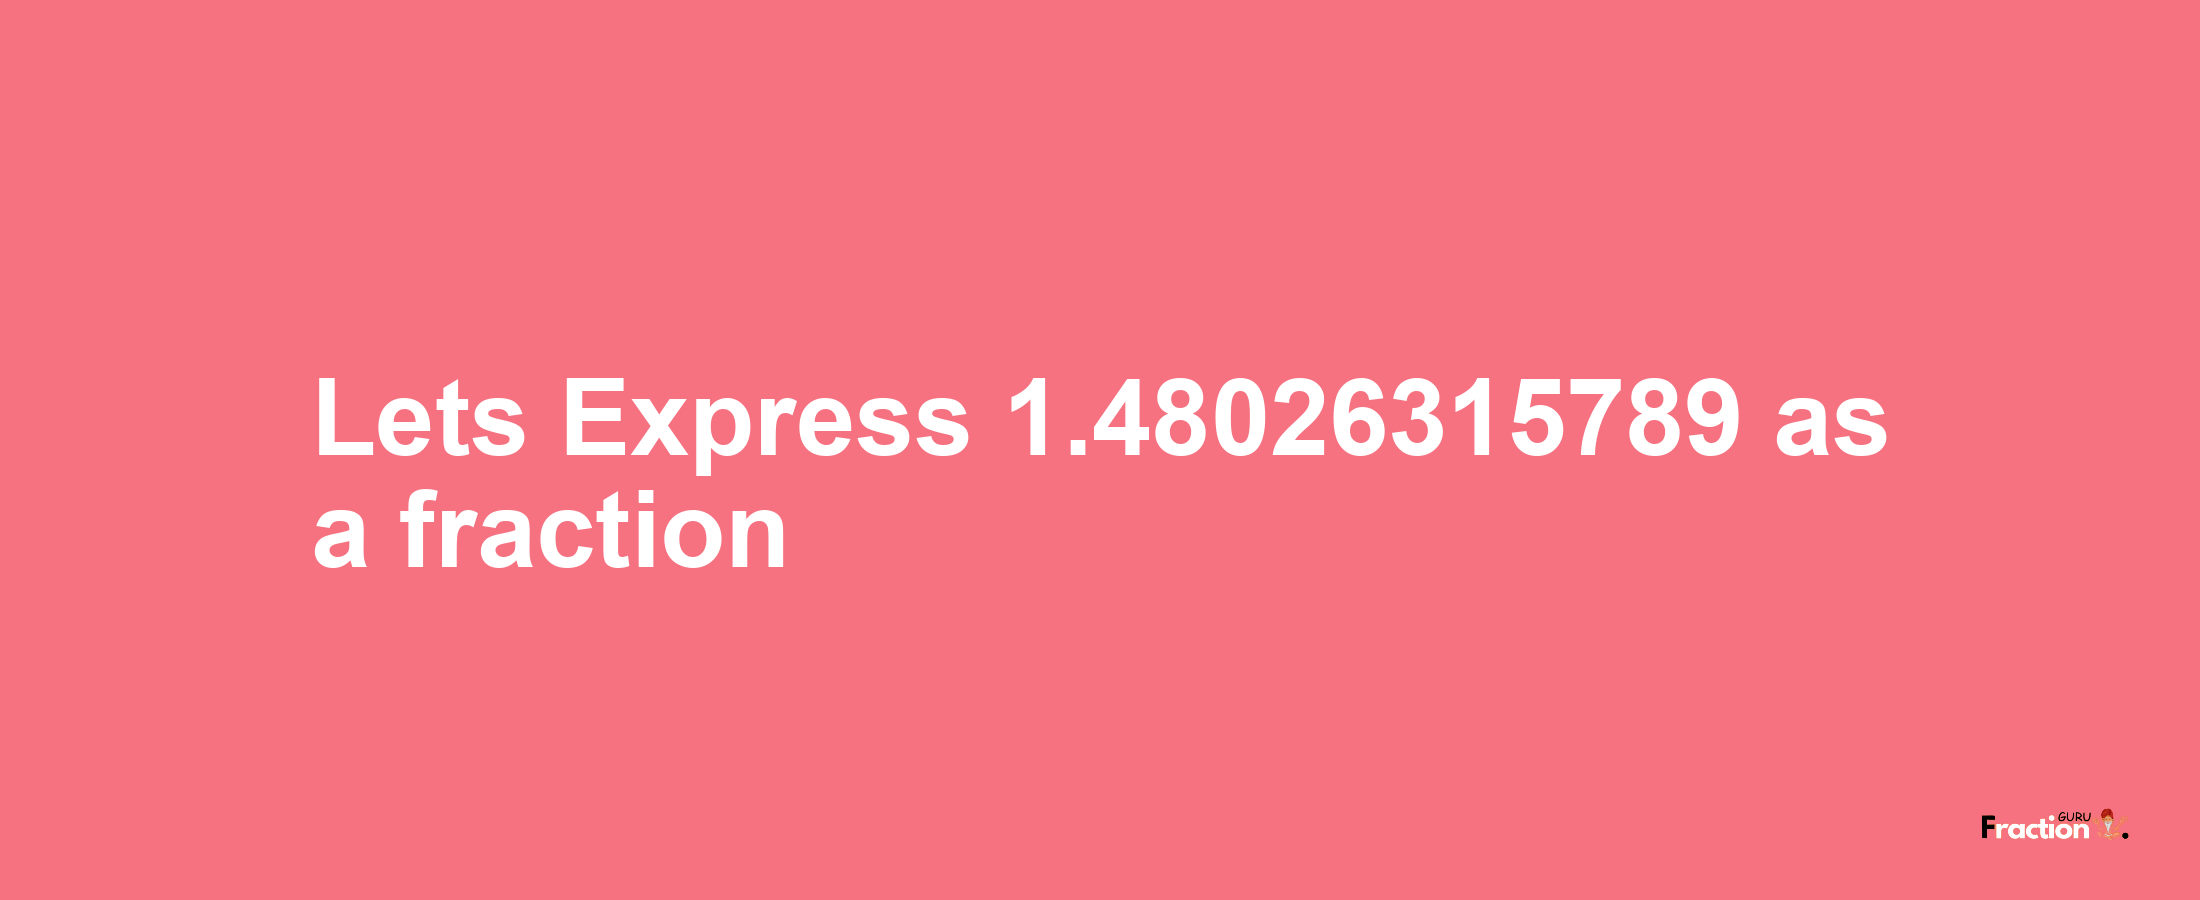 Lets Express 1.48026315789 as afraction